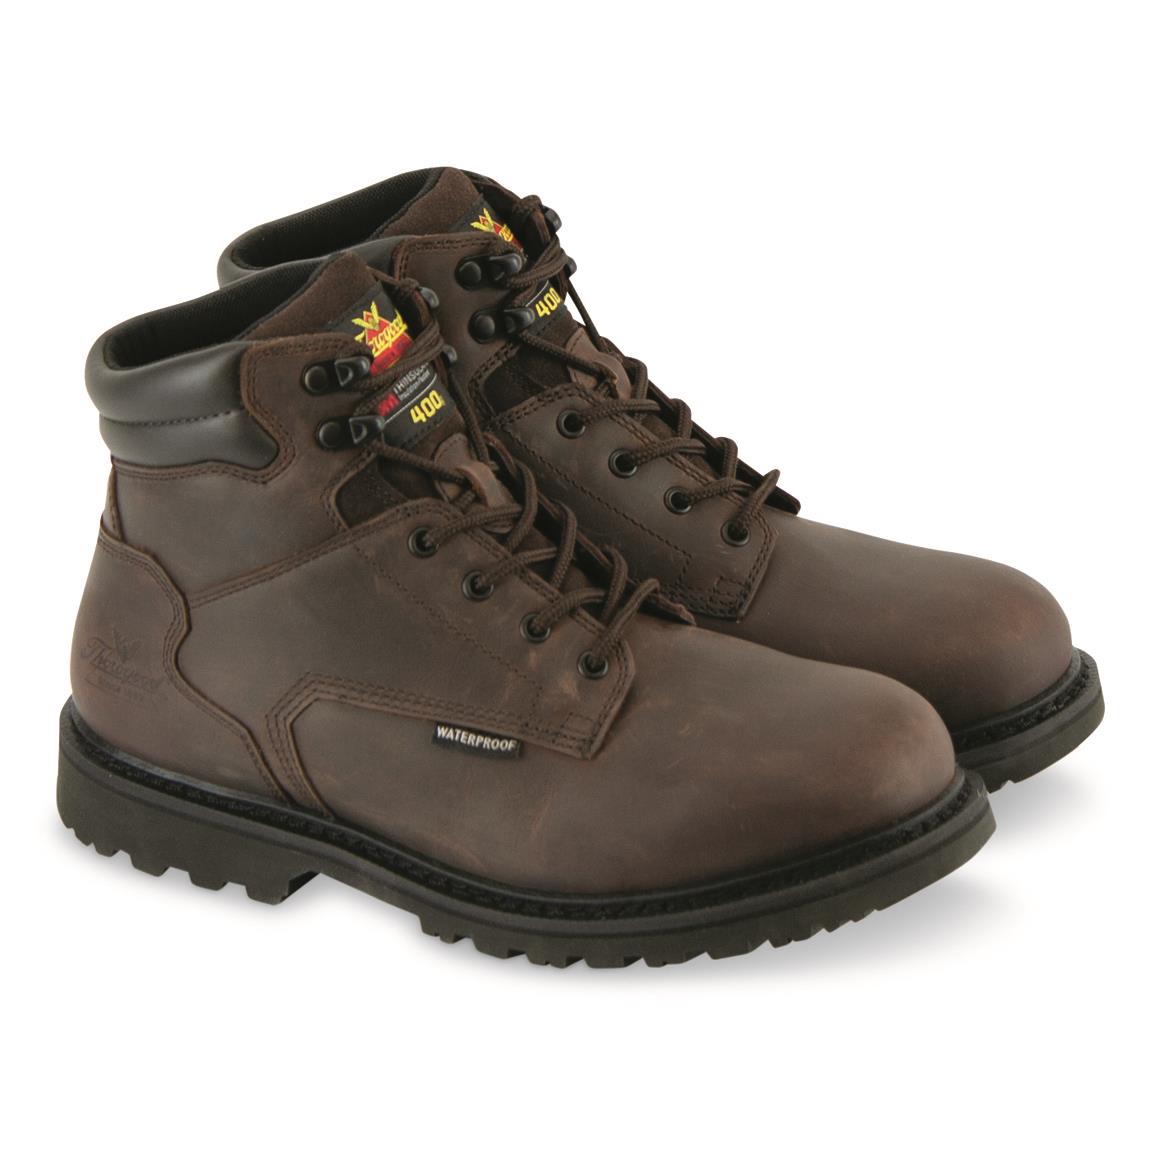 Thorogood V-Series 6" Waterproof Insulated Boots, 400 Gram, Brown